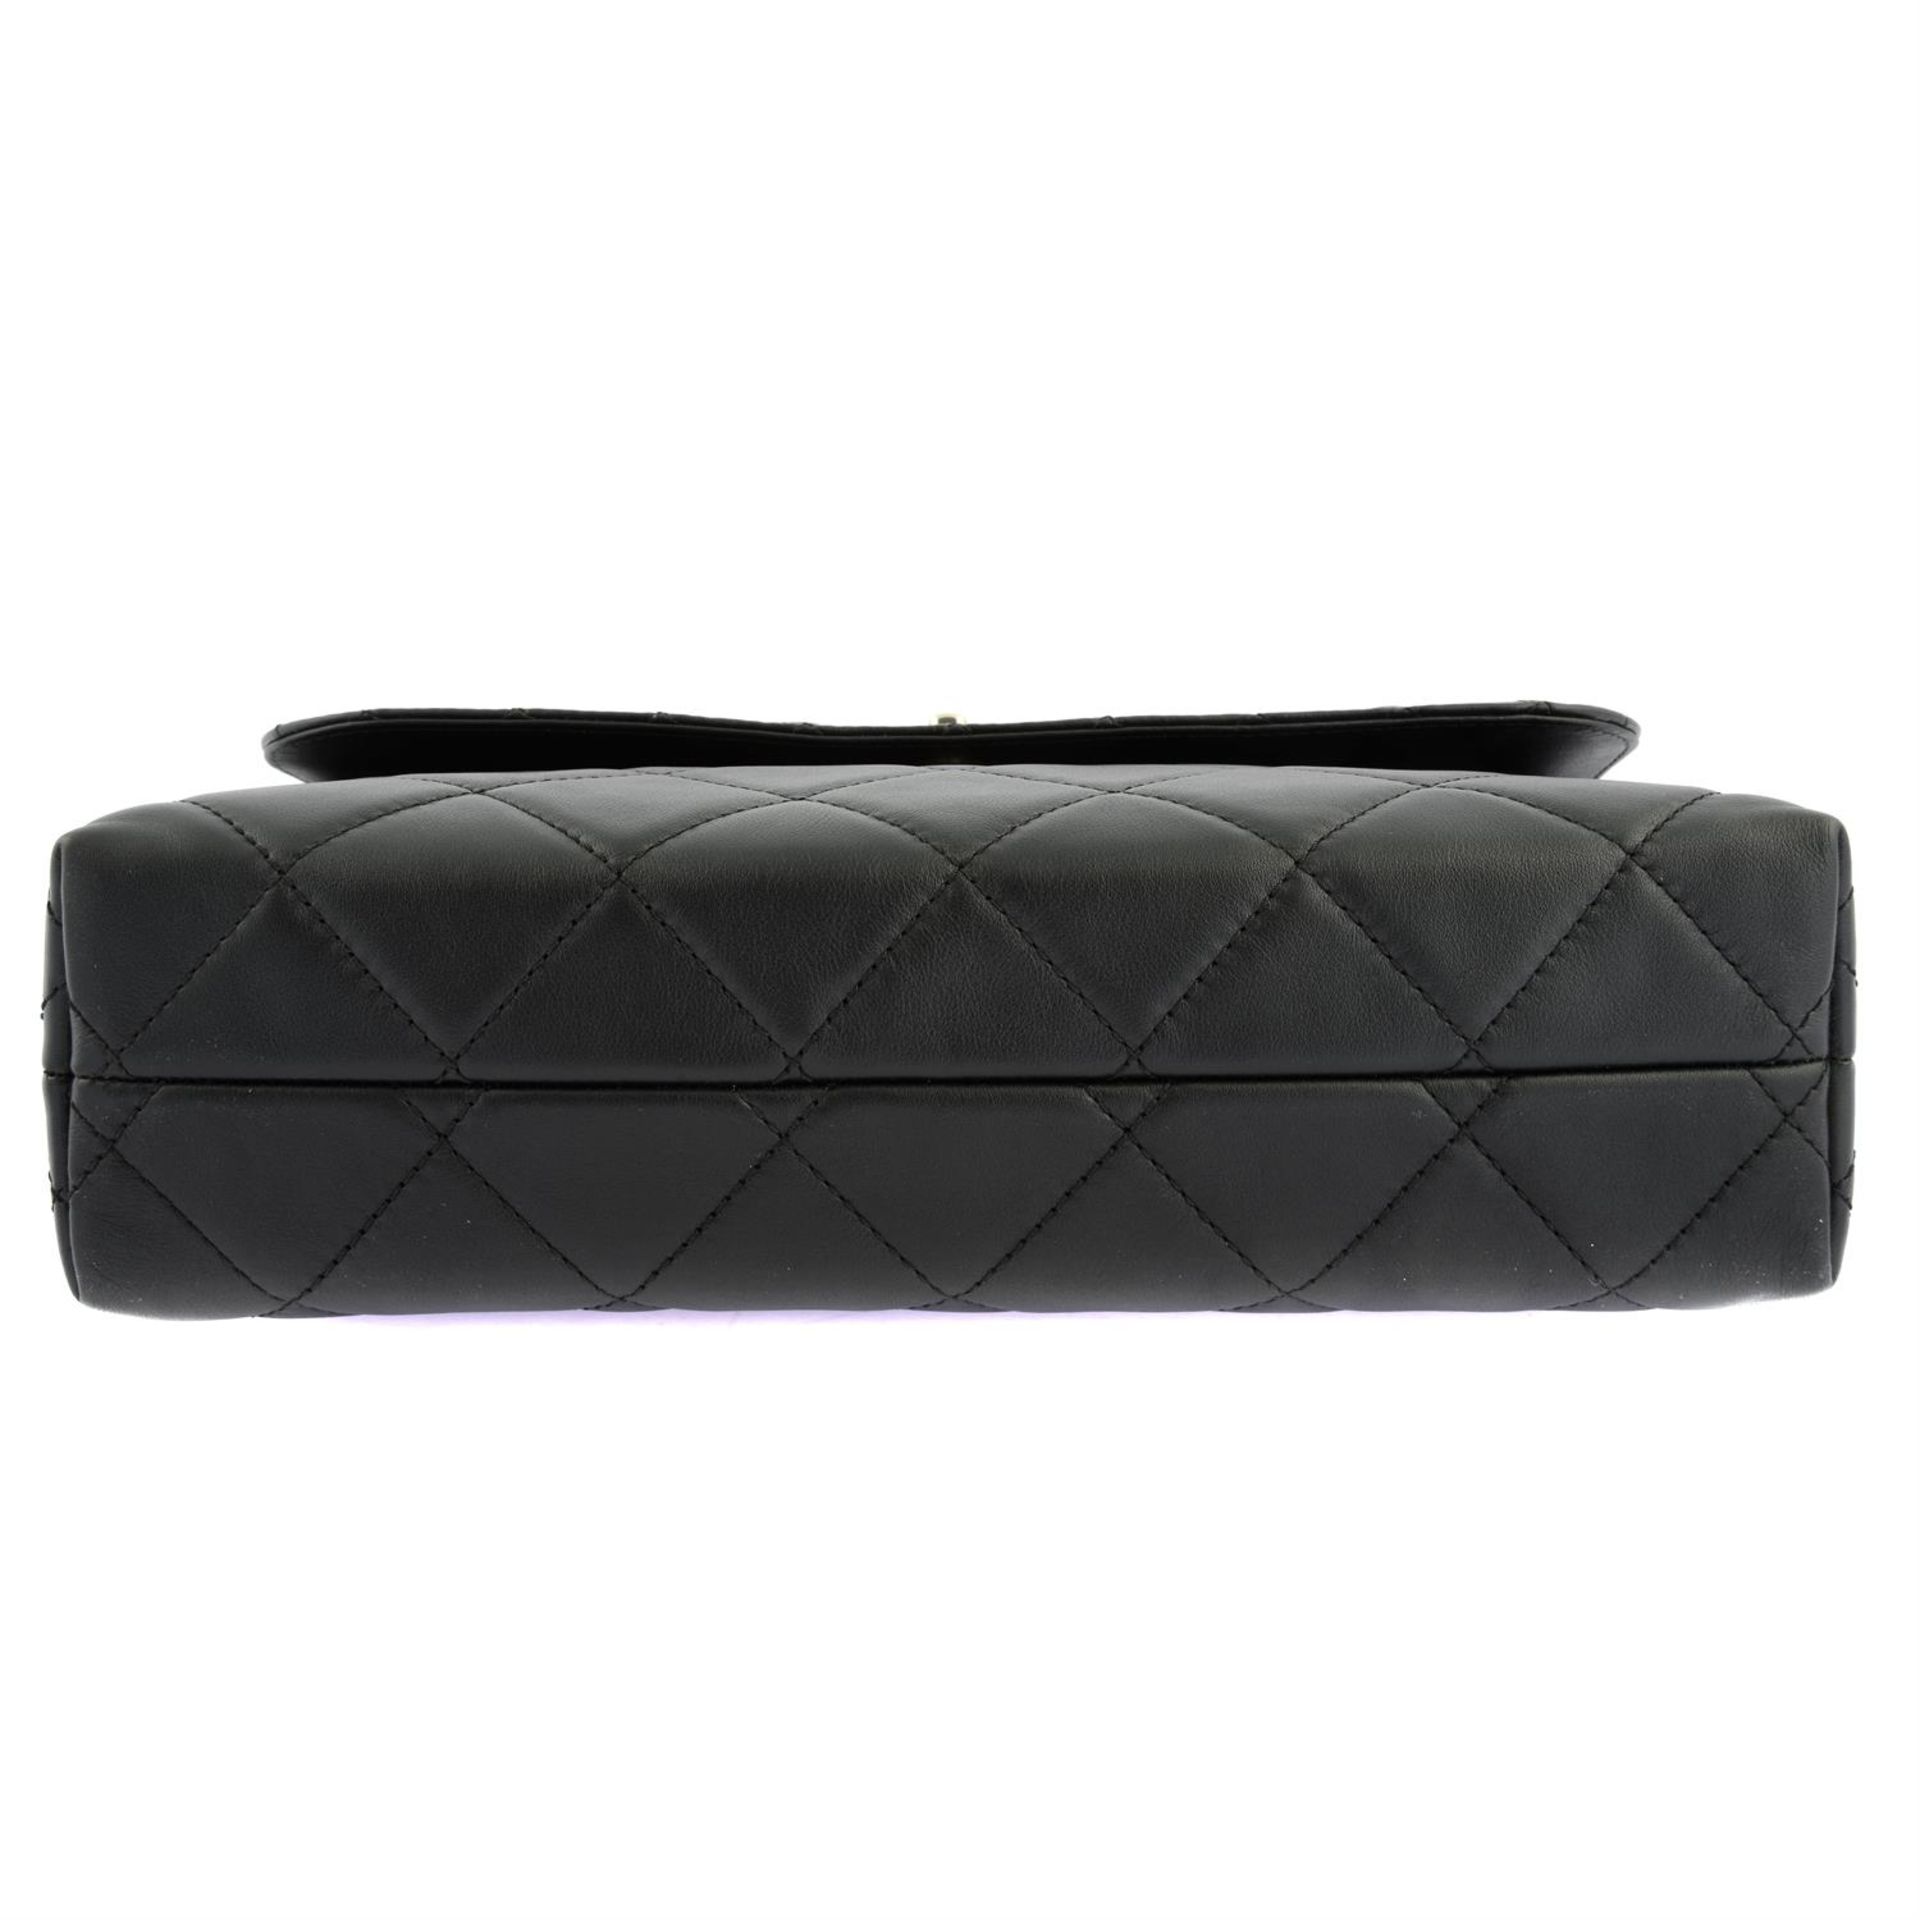 CHANEL - a black Calfskin leather Business flap bag. - Image 5 of 6